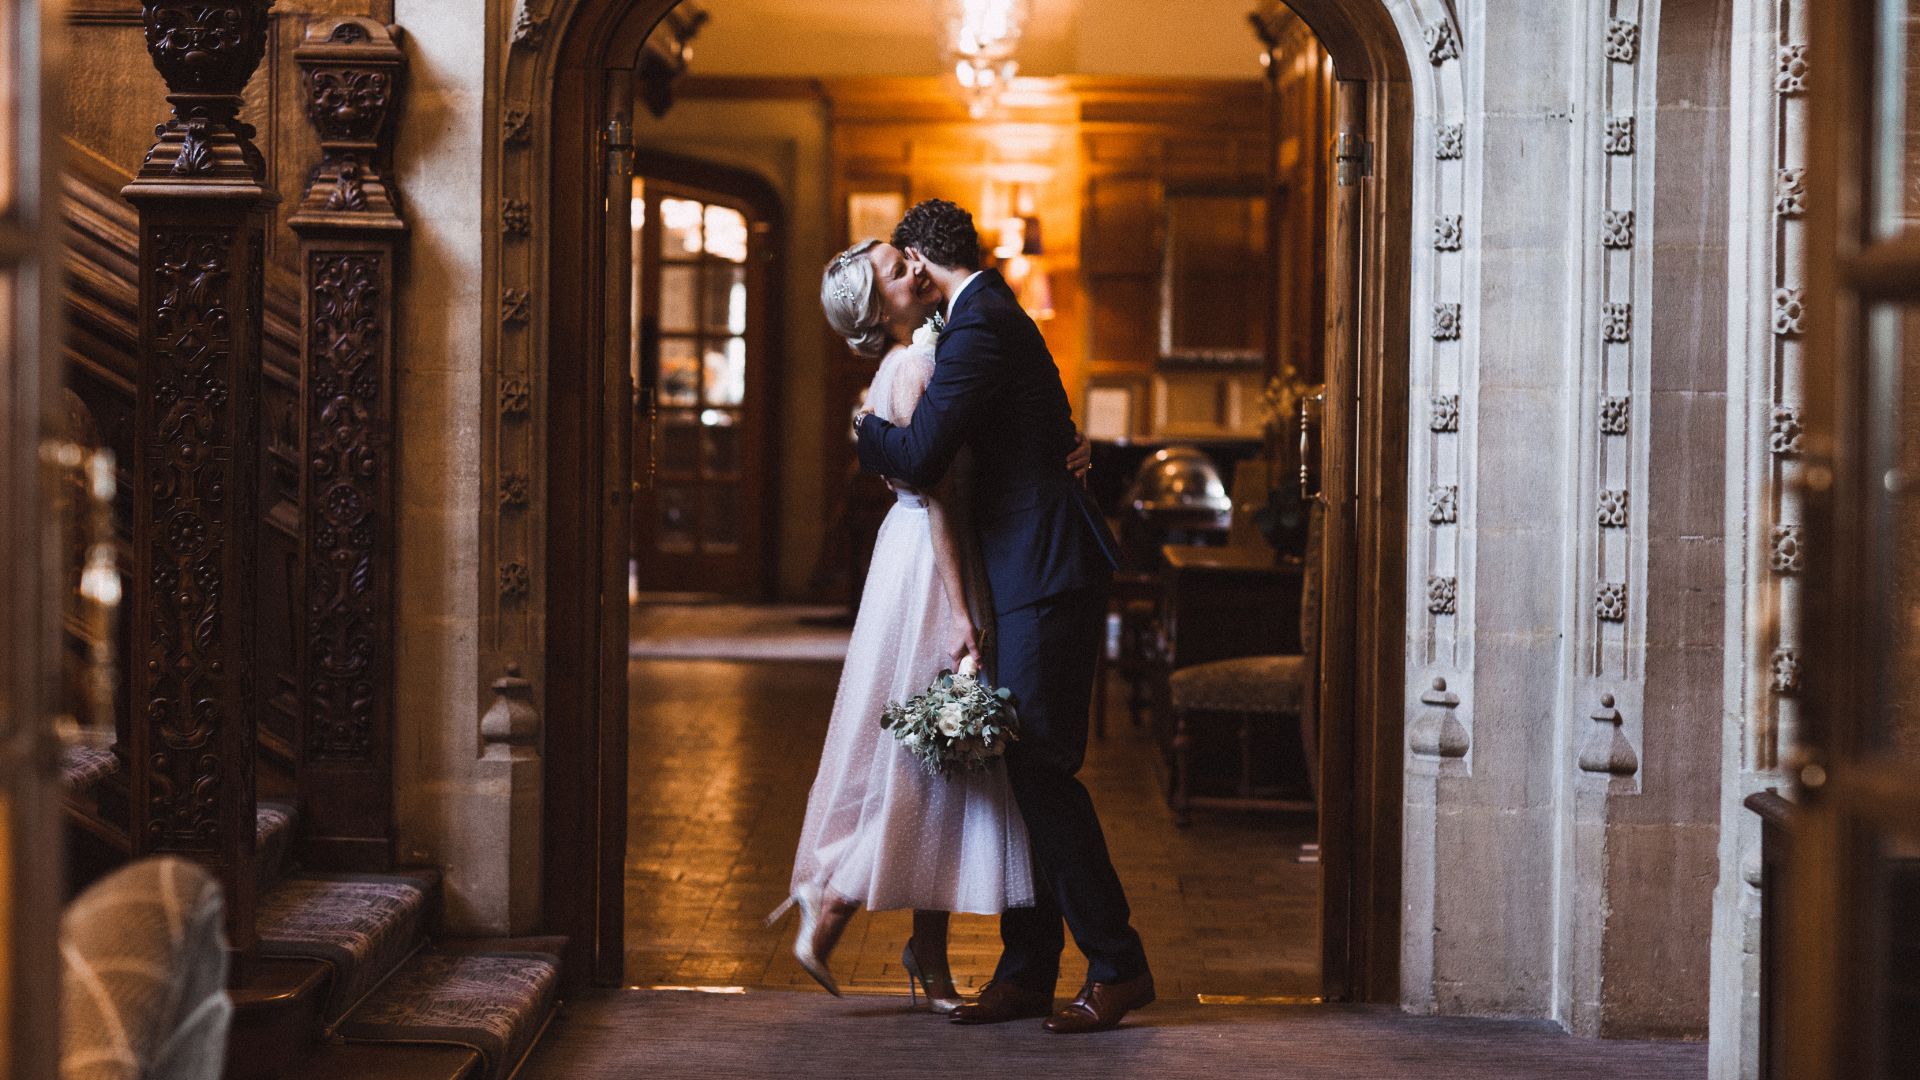 Married couple embracing at arched doorway